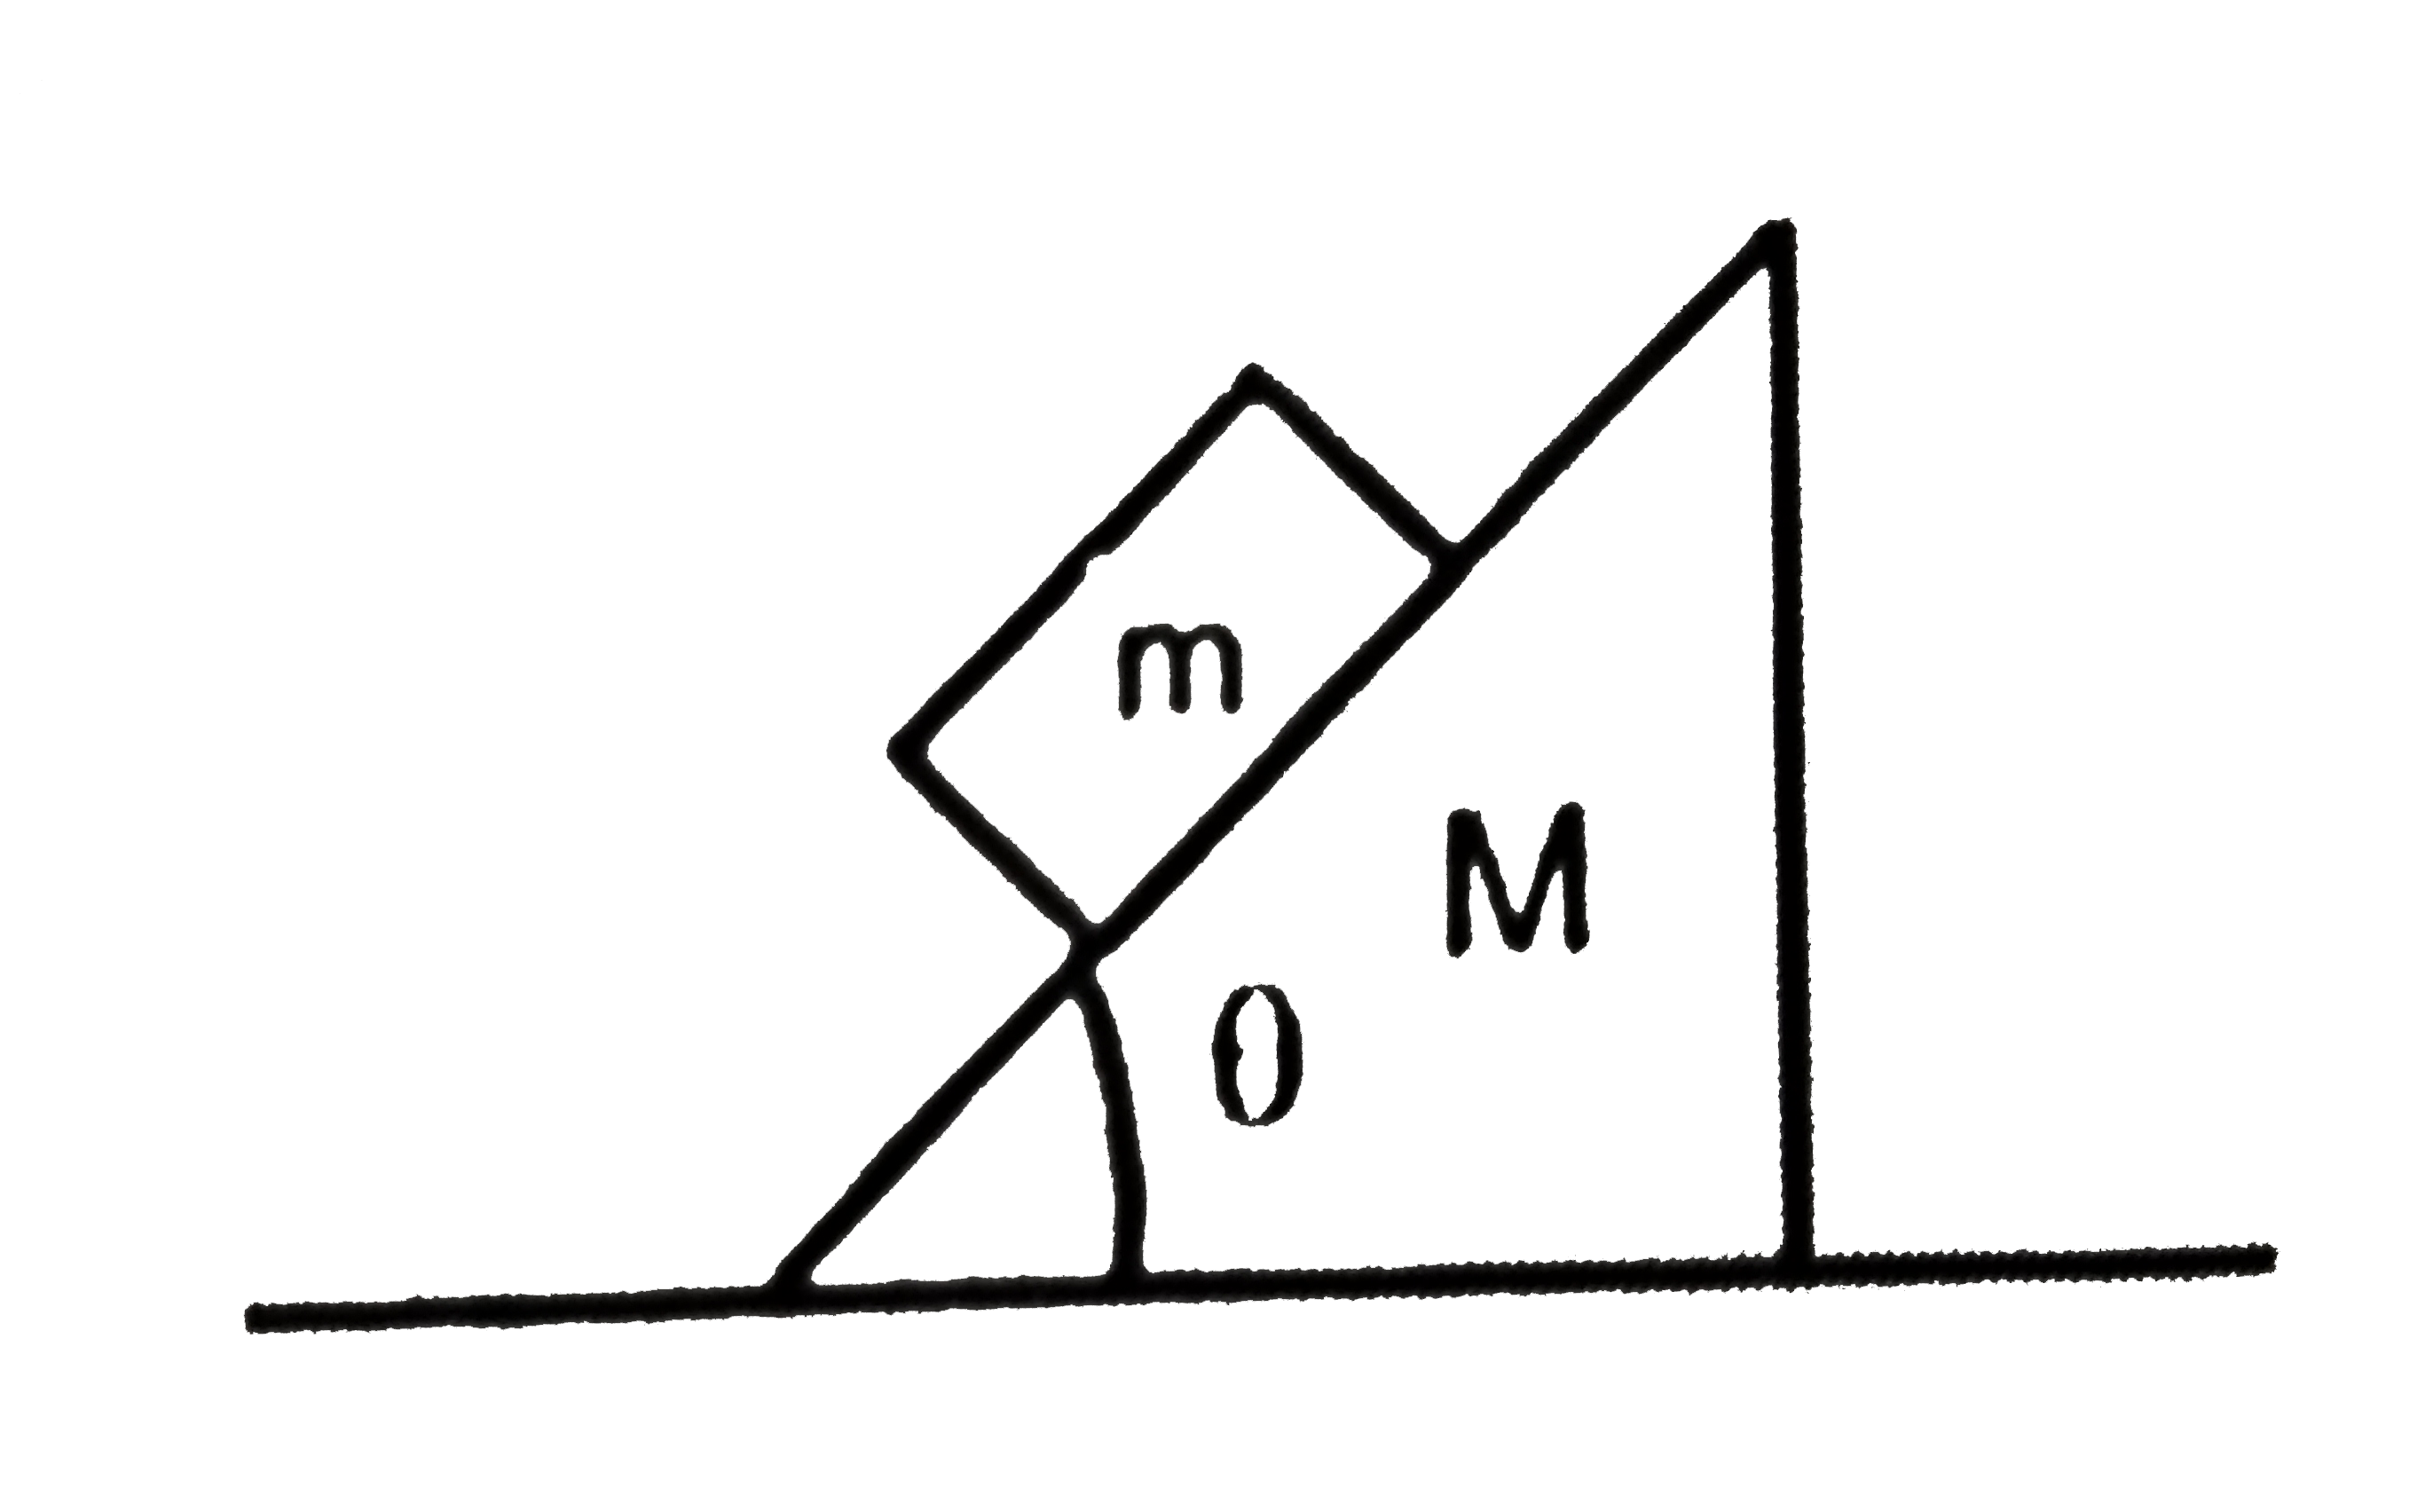 A block of mass m lies on wedge of mass Mas shown in figure. Find the minimum friction coeffcient required between wedge Mand ground so that it does not move while block m slips down on it.